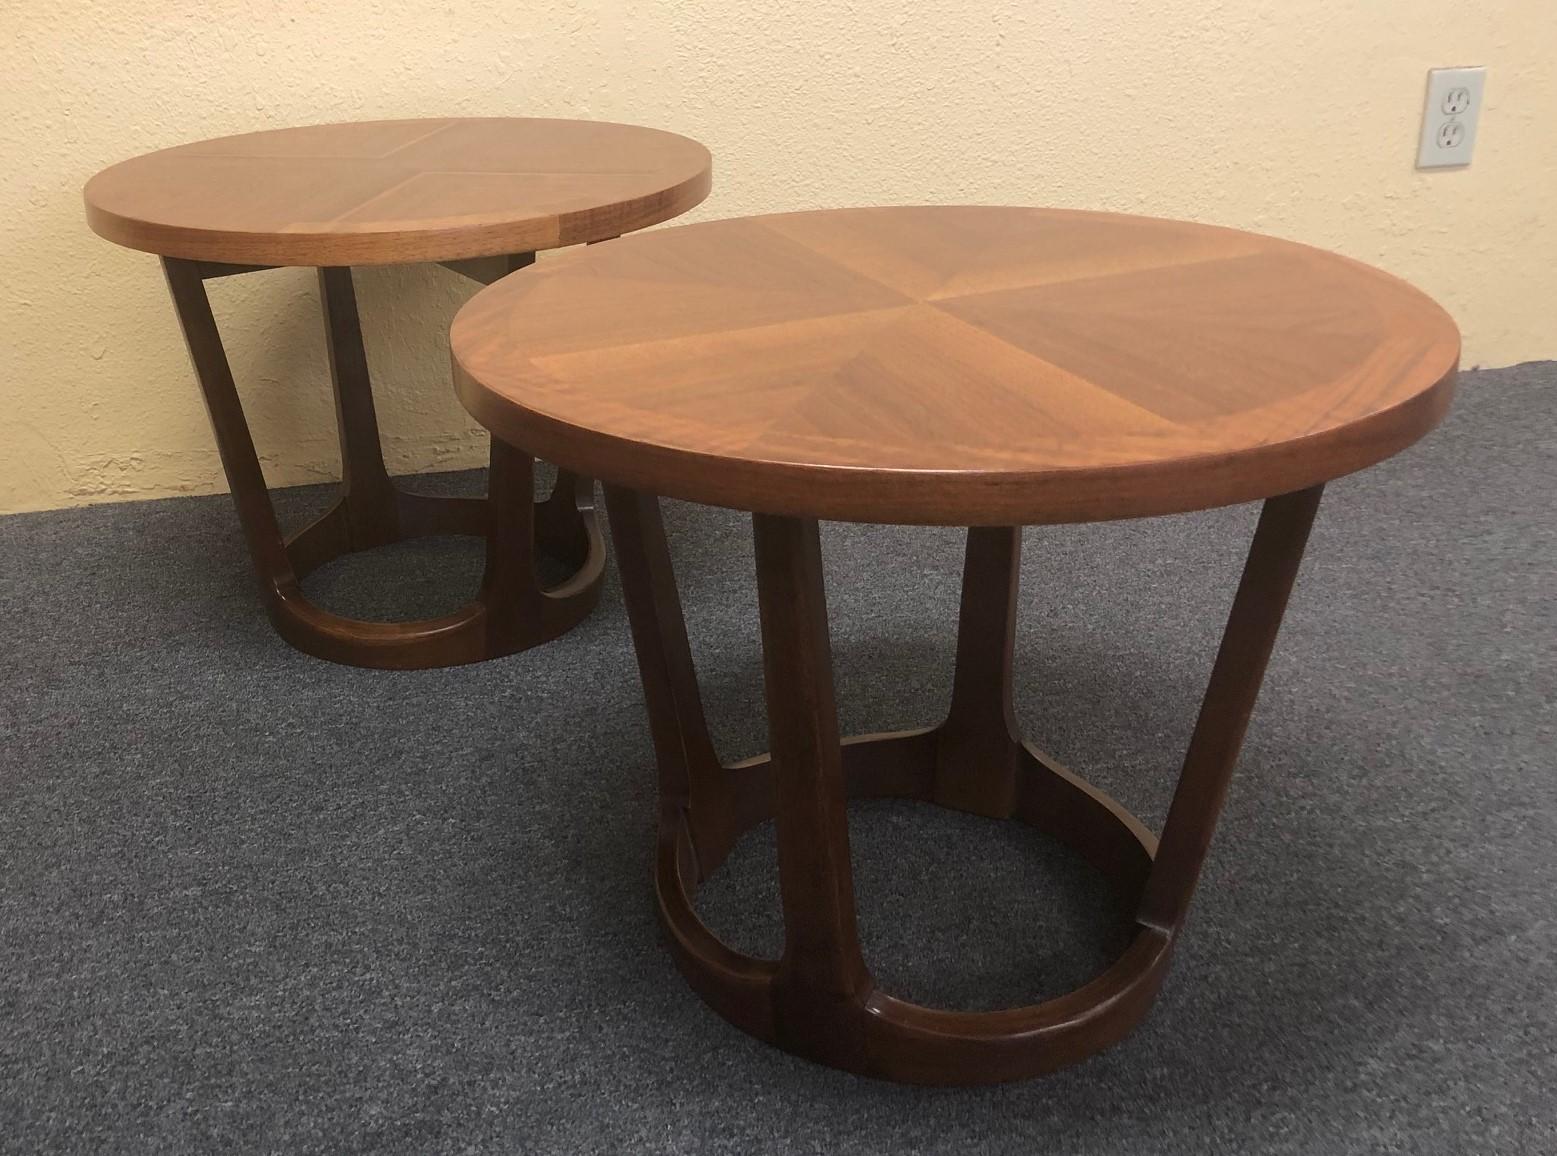 Pair of American modern walnut end / side tables by Lane Furniture, circa 1960s. Beautiful craftsmanship and sturdy construction on these round tables with tapered support beams. The tabletop has been professionally refinished and shows an